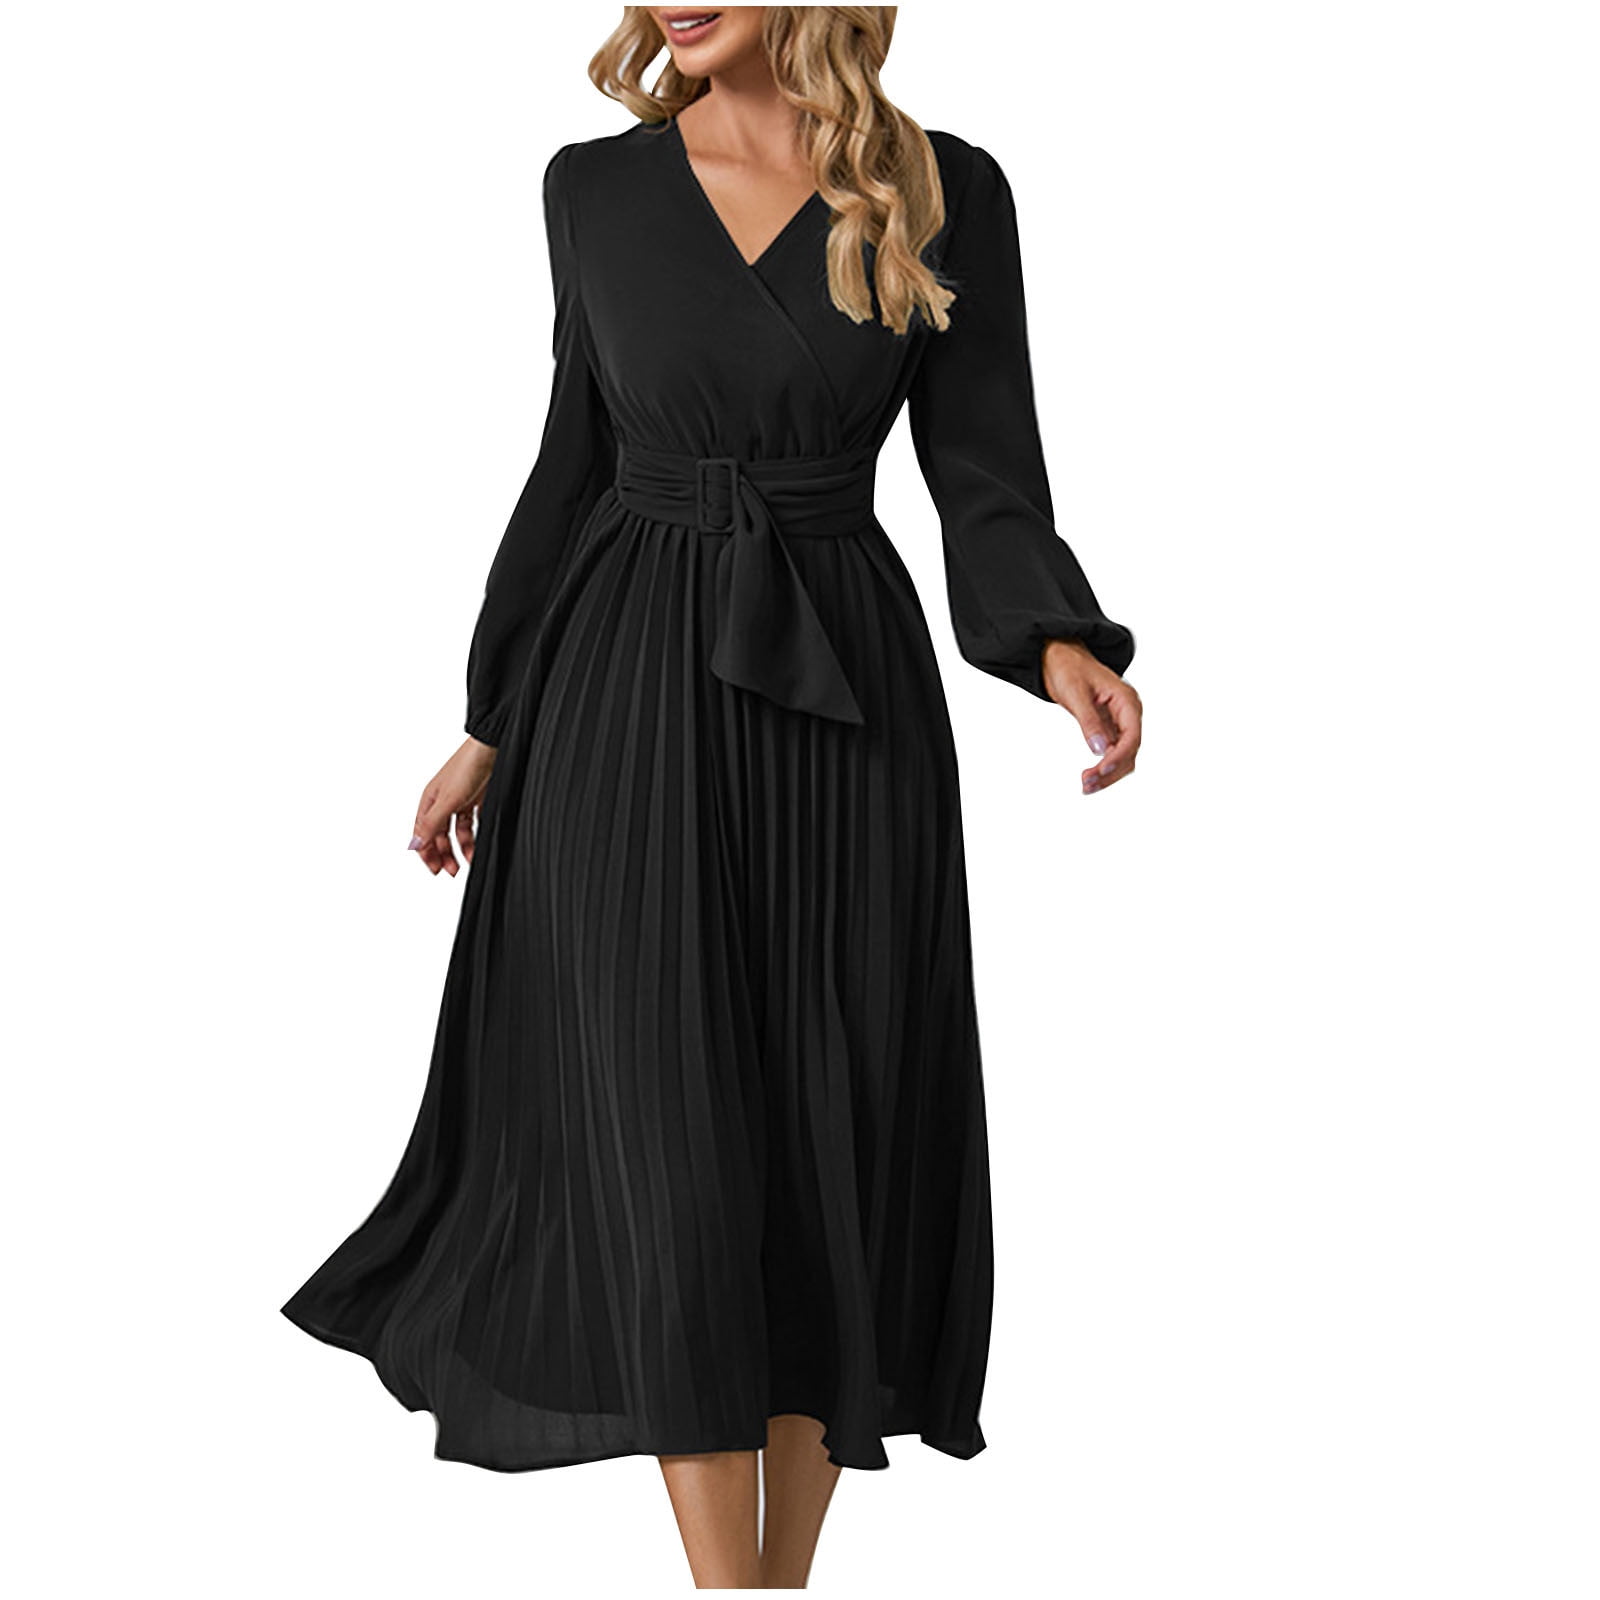 dresses for funerals